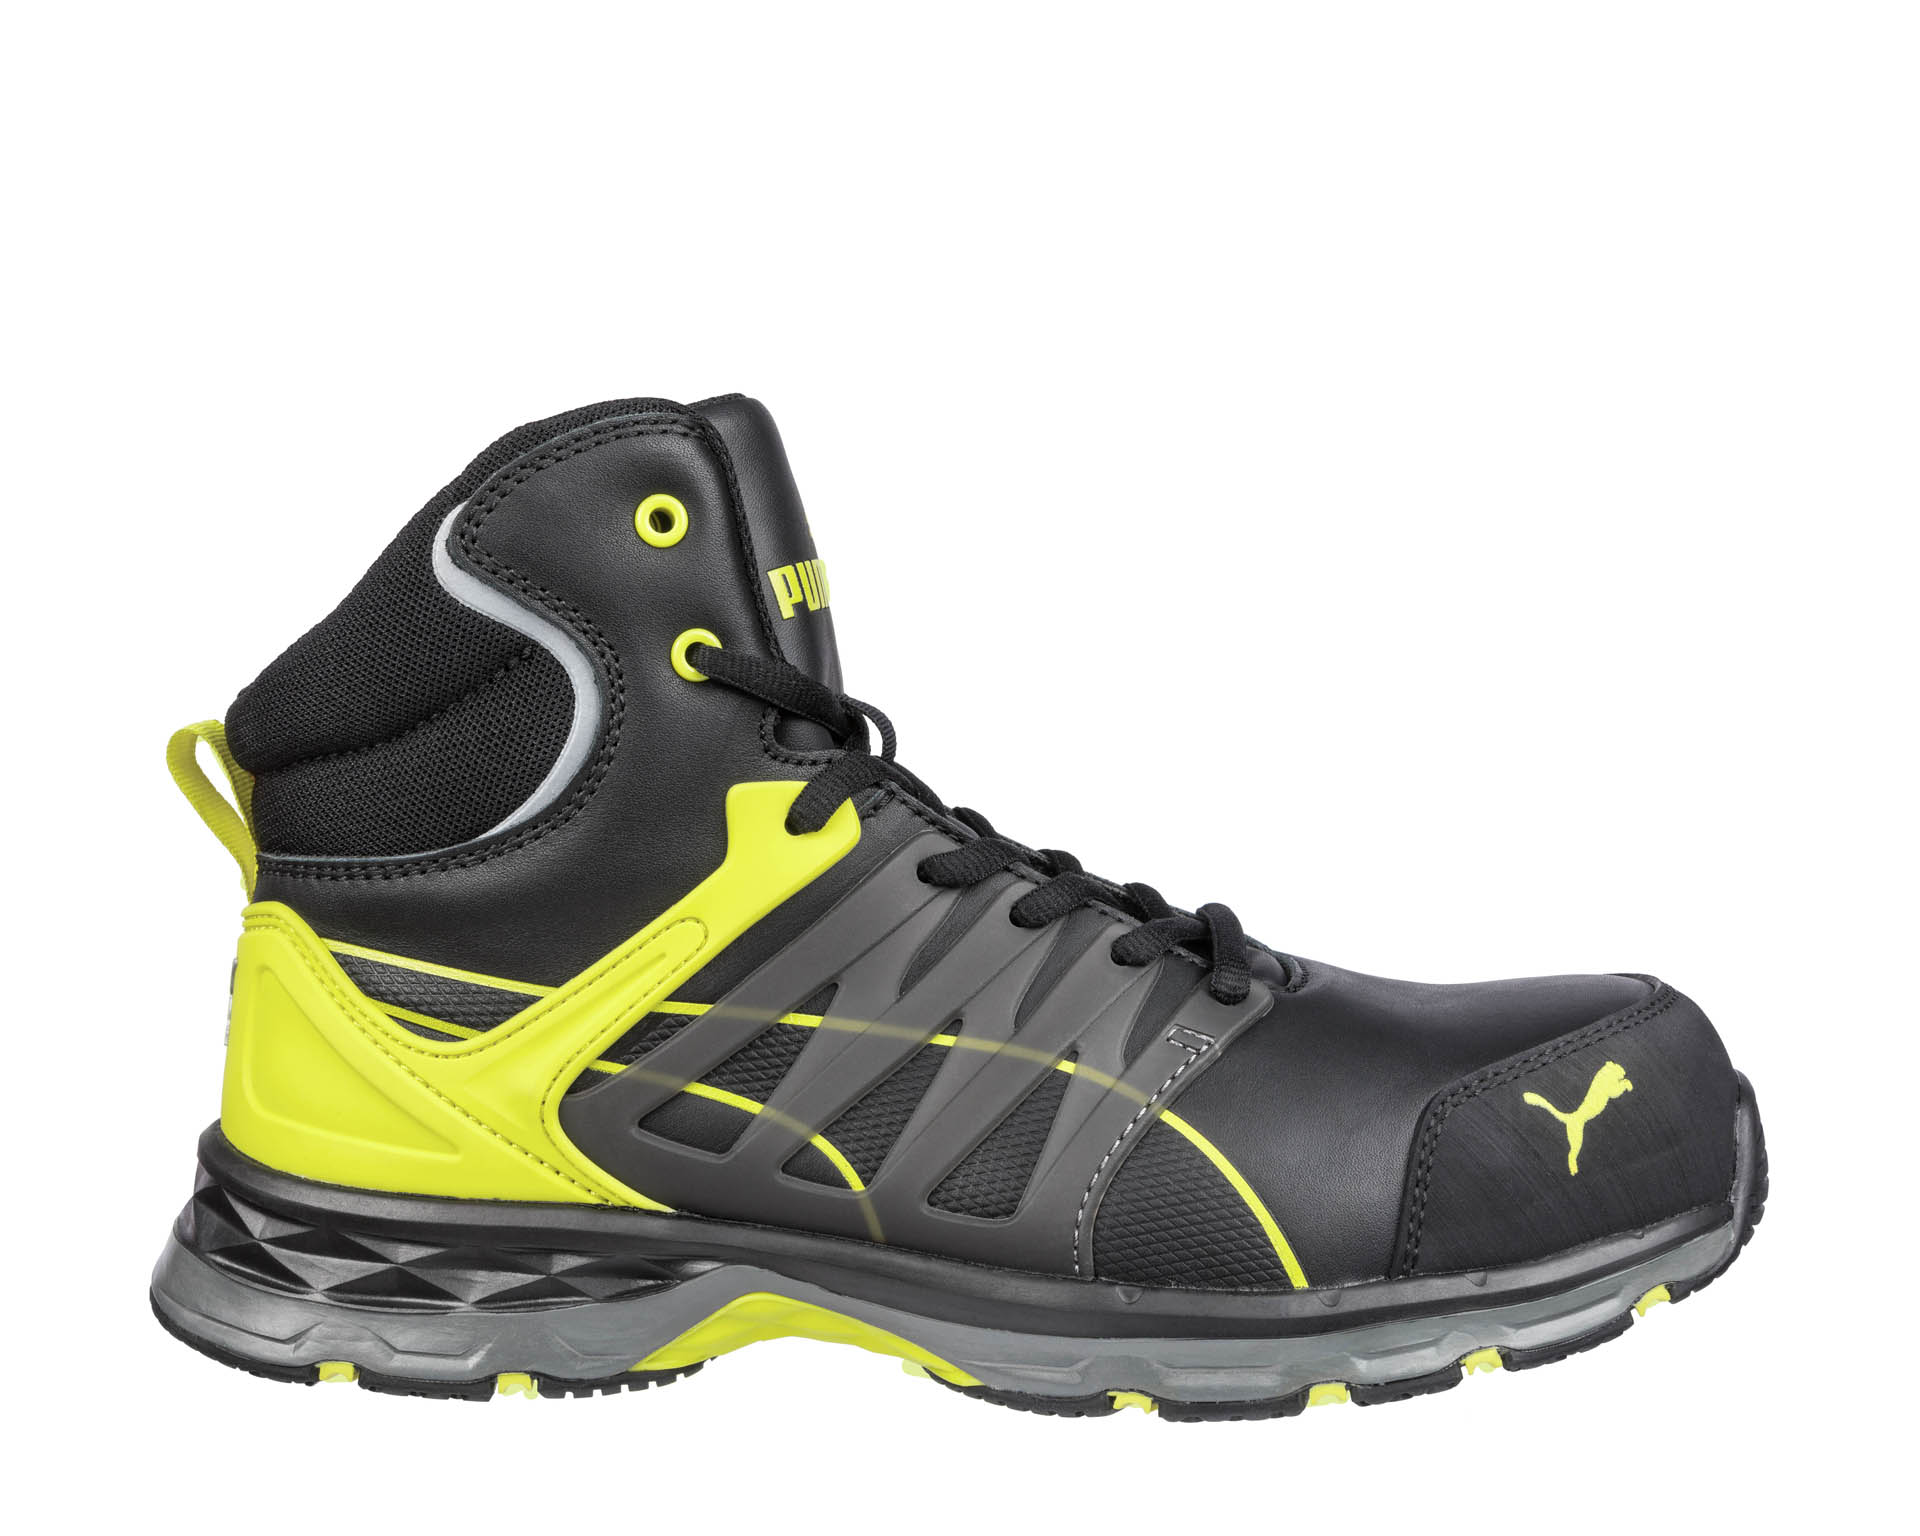 PUMA SAFETY safety HRO Puma shoes YELLOW English ESD MID VELOCITY SRC 2.0 S3 | Safety